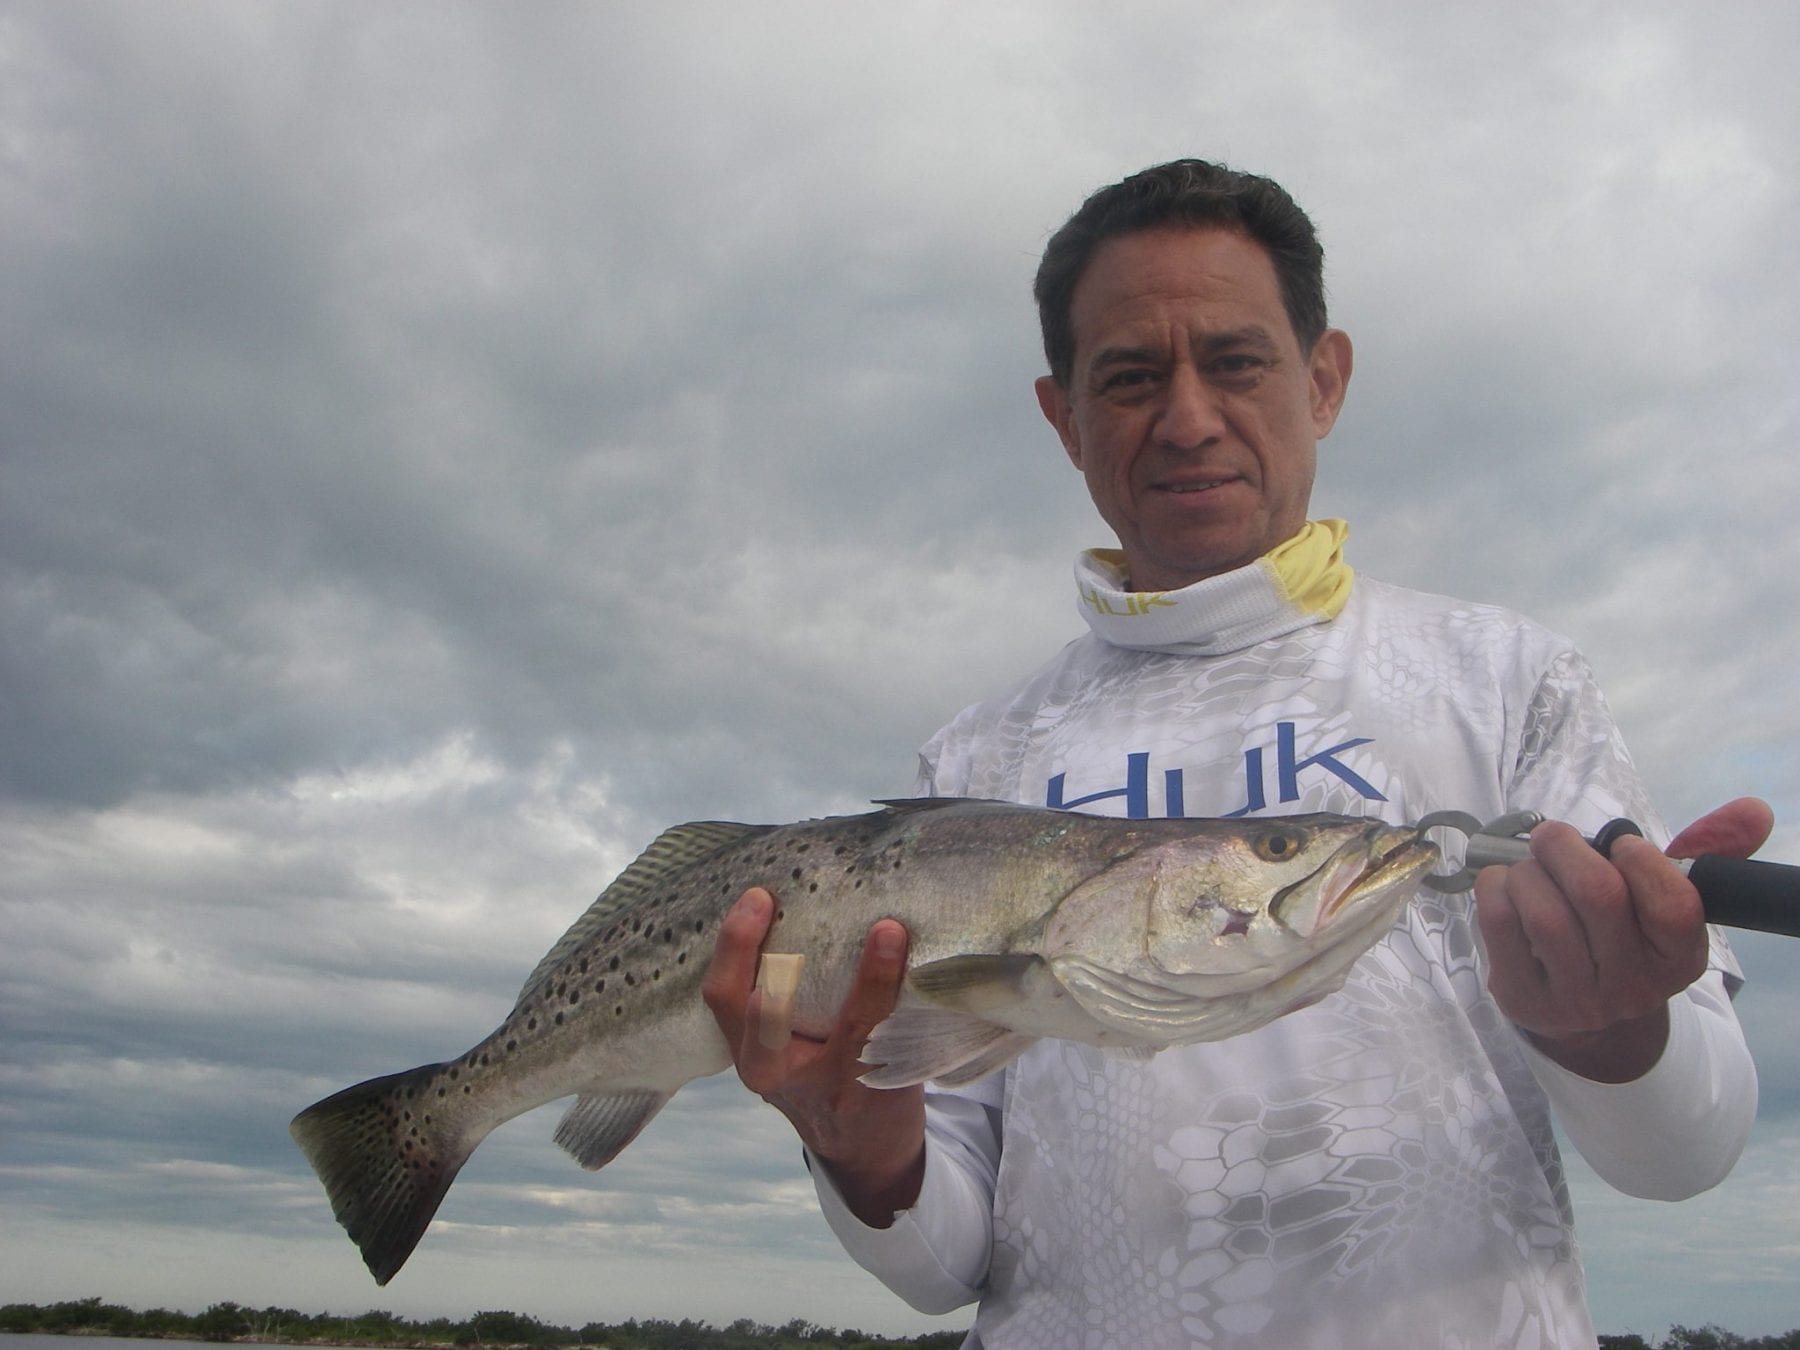 Tony enjoyed some early morning top-water action on a recent trip with Capt. Mark Wright.